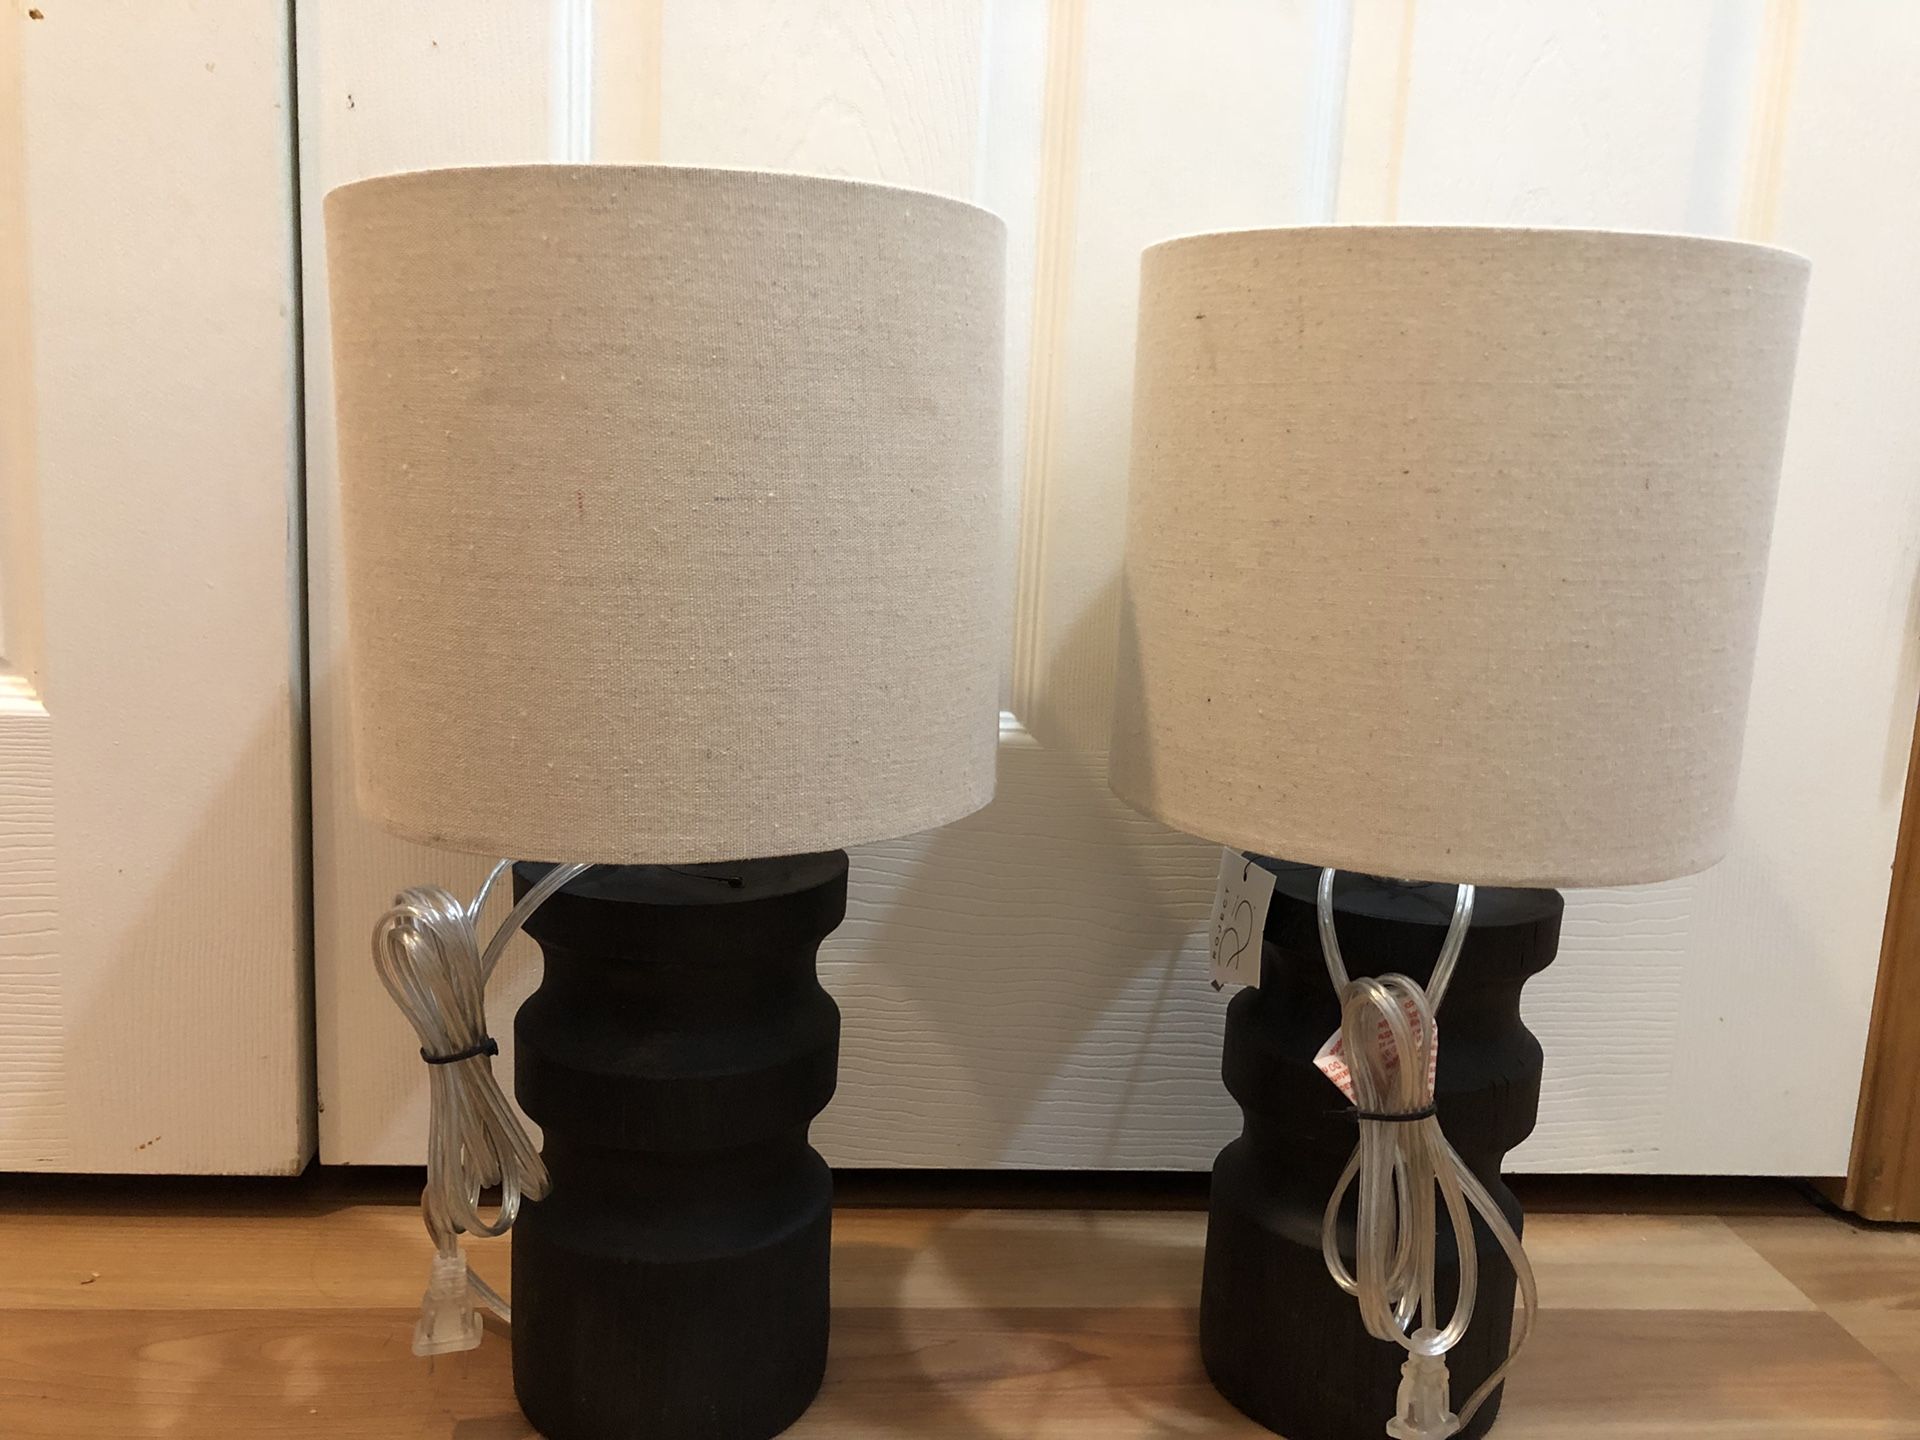 Brand new lamps from target